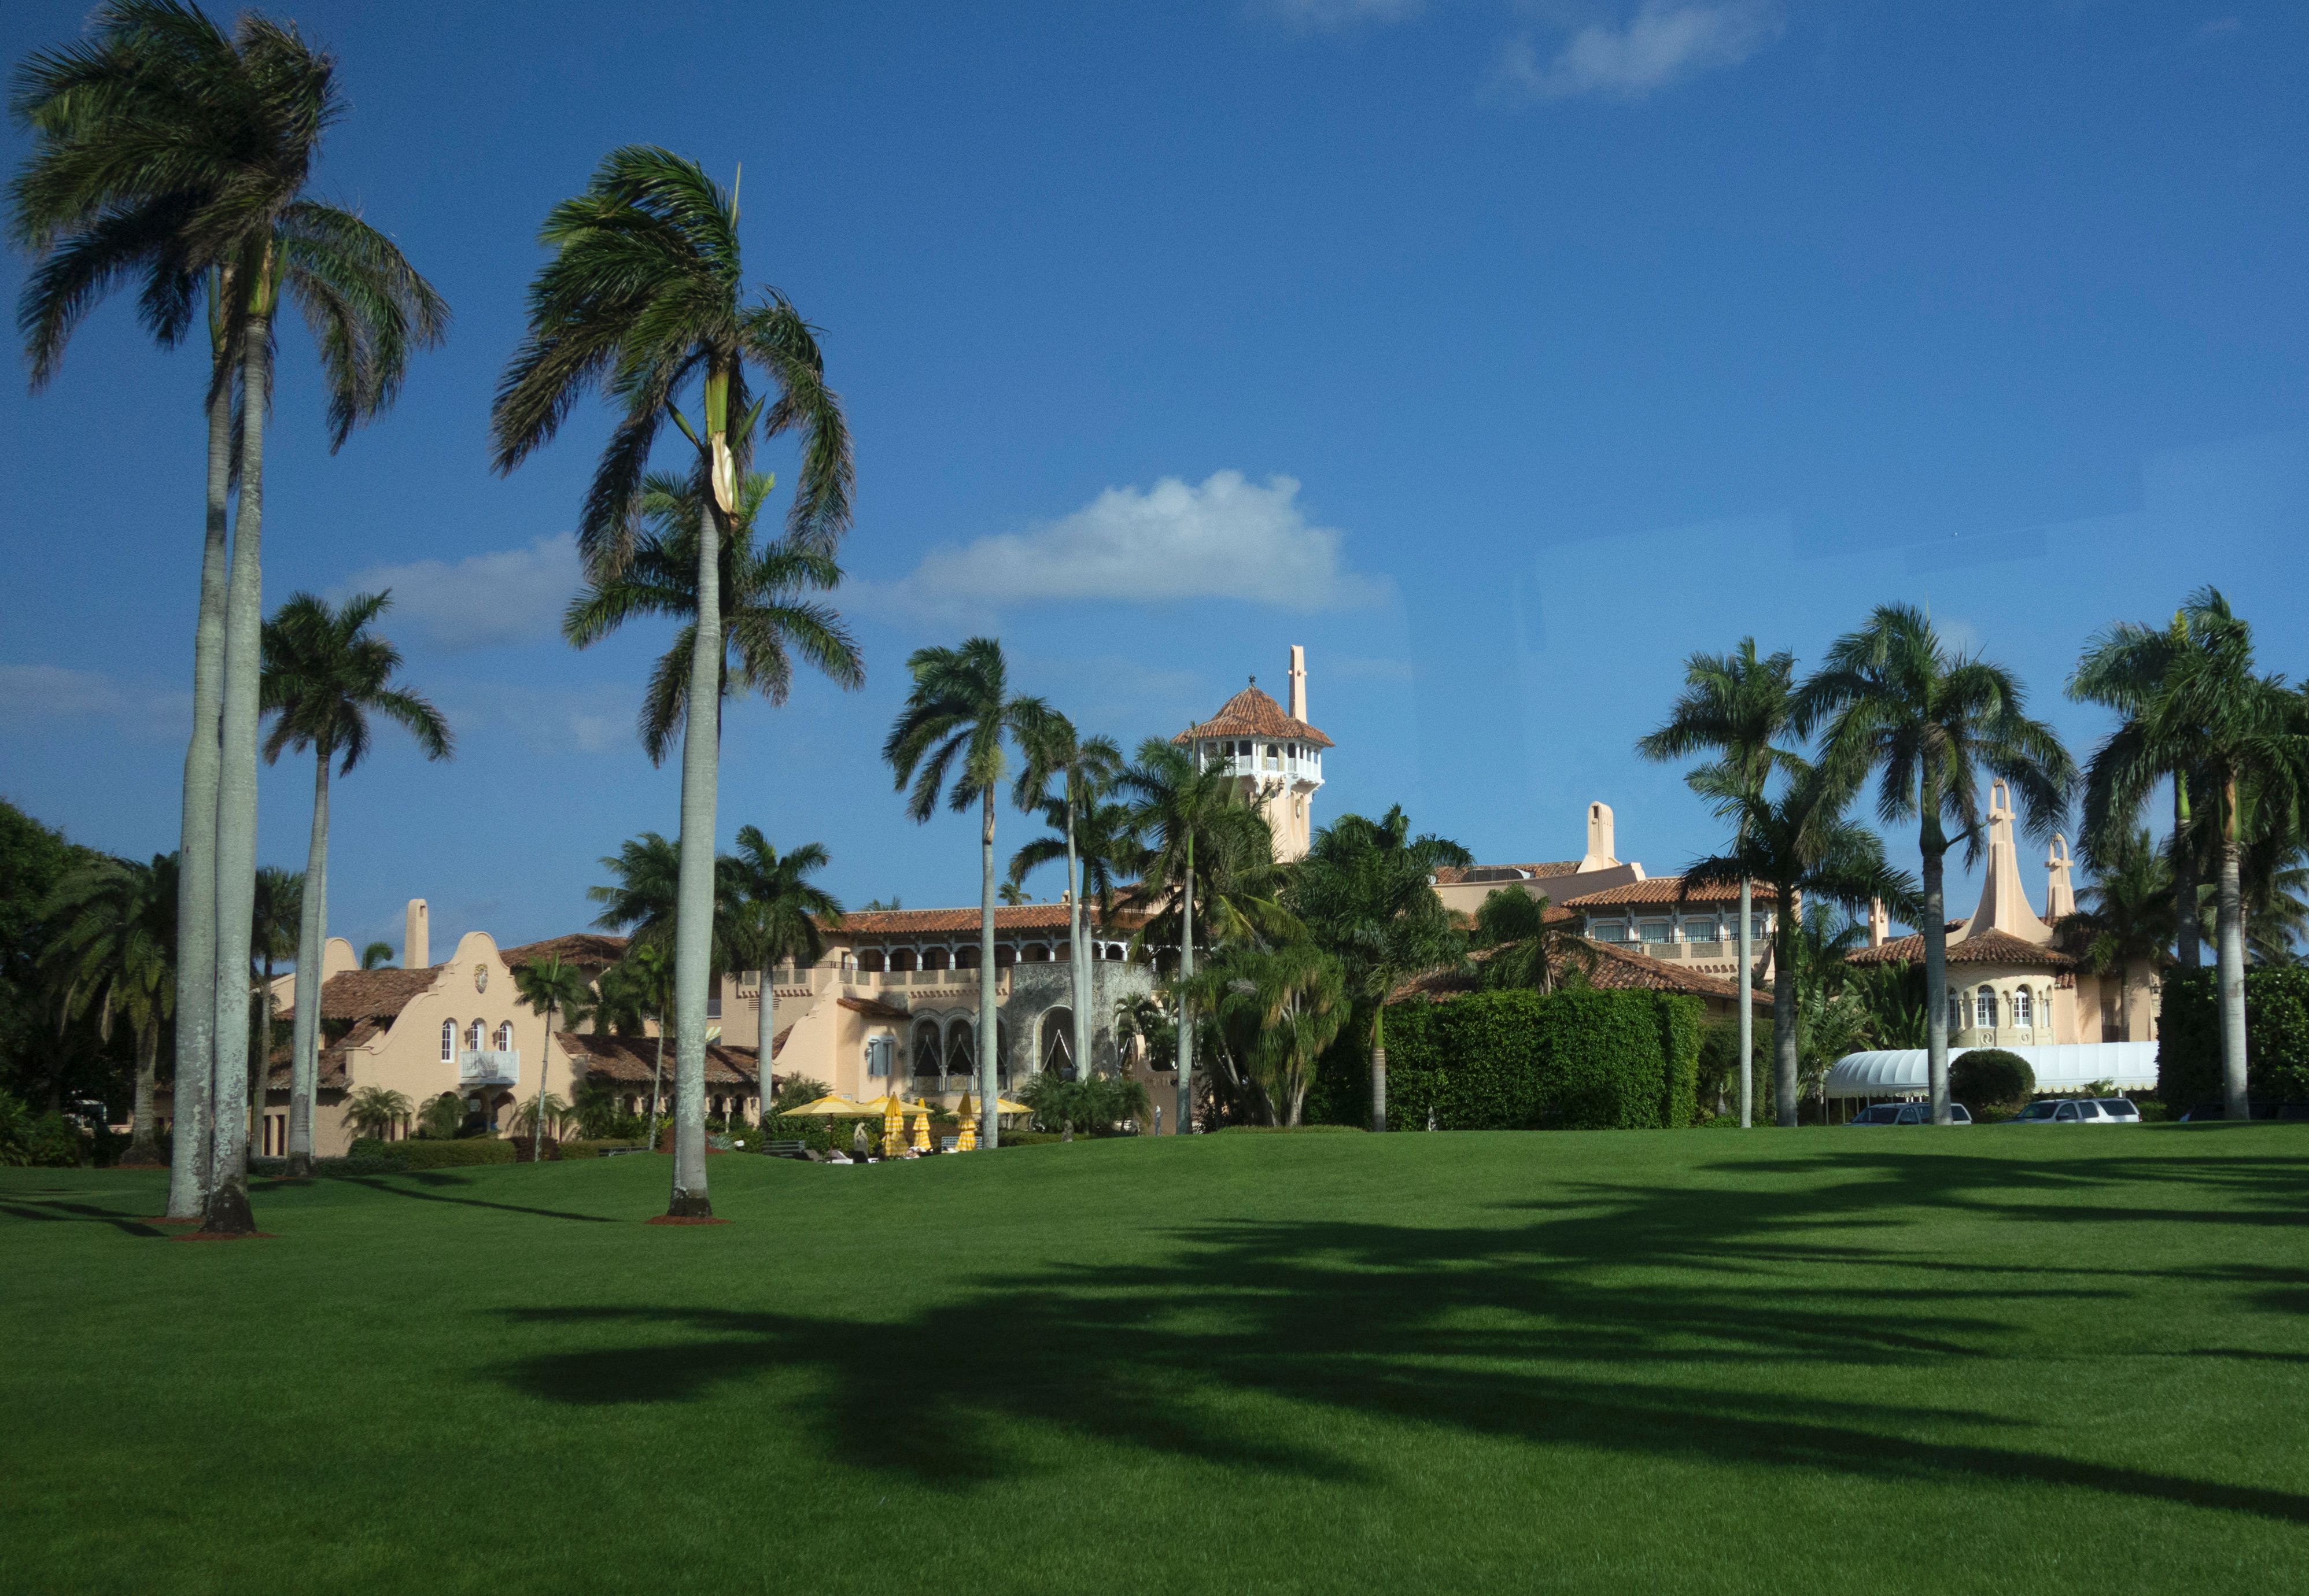 The Mar-a-Lago Club January 1, 2017 at Mar-a-Lago in Palm Beach, Florida. DON EMMERT/AFP/Getty Images